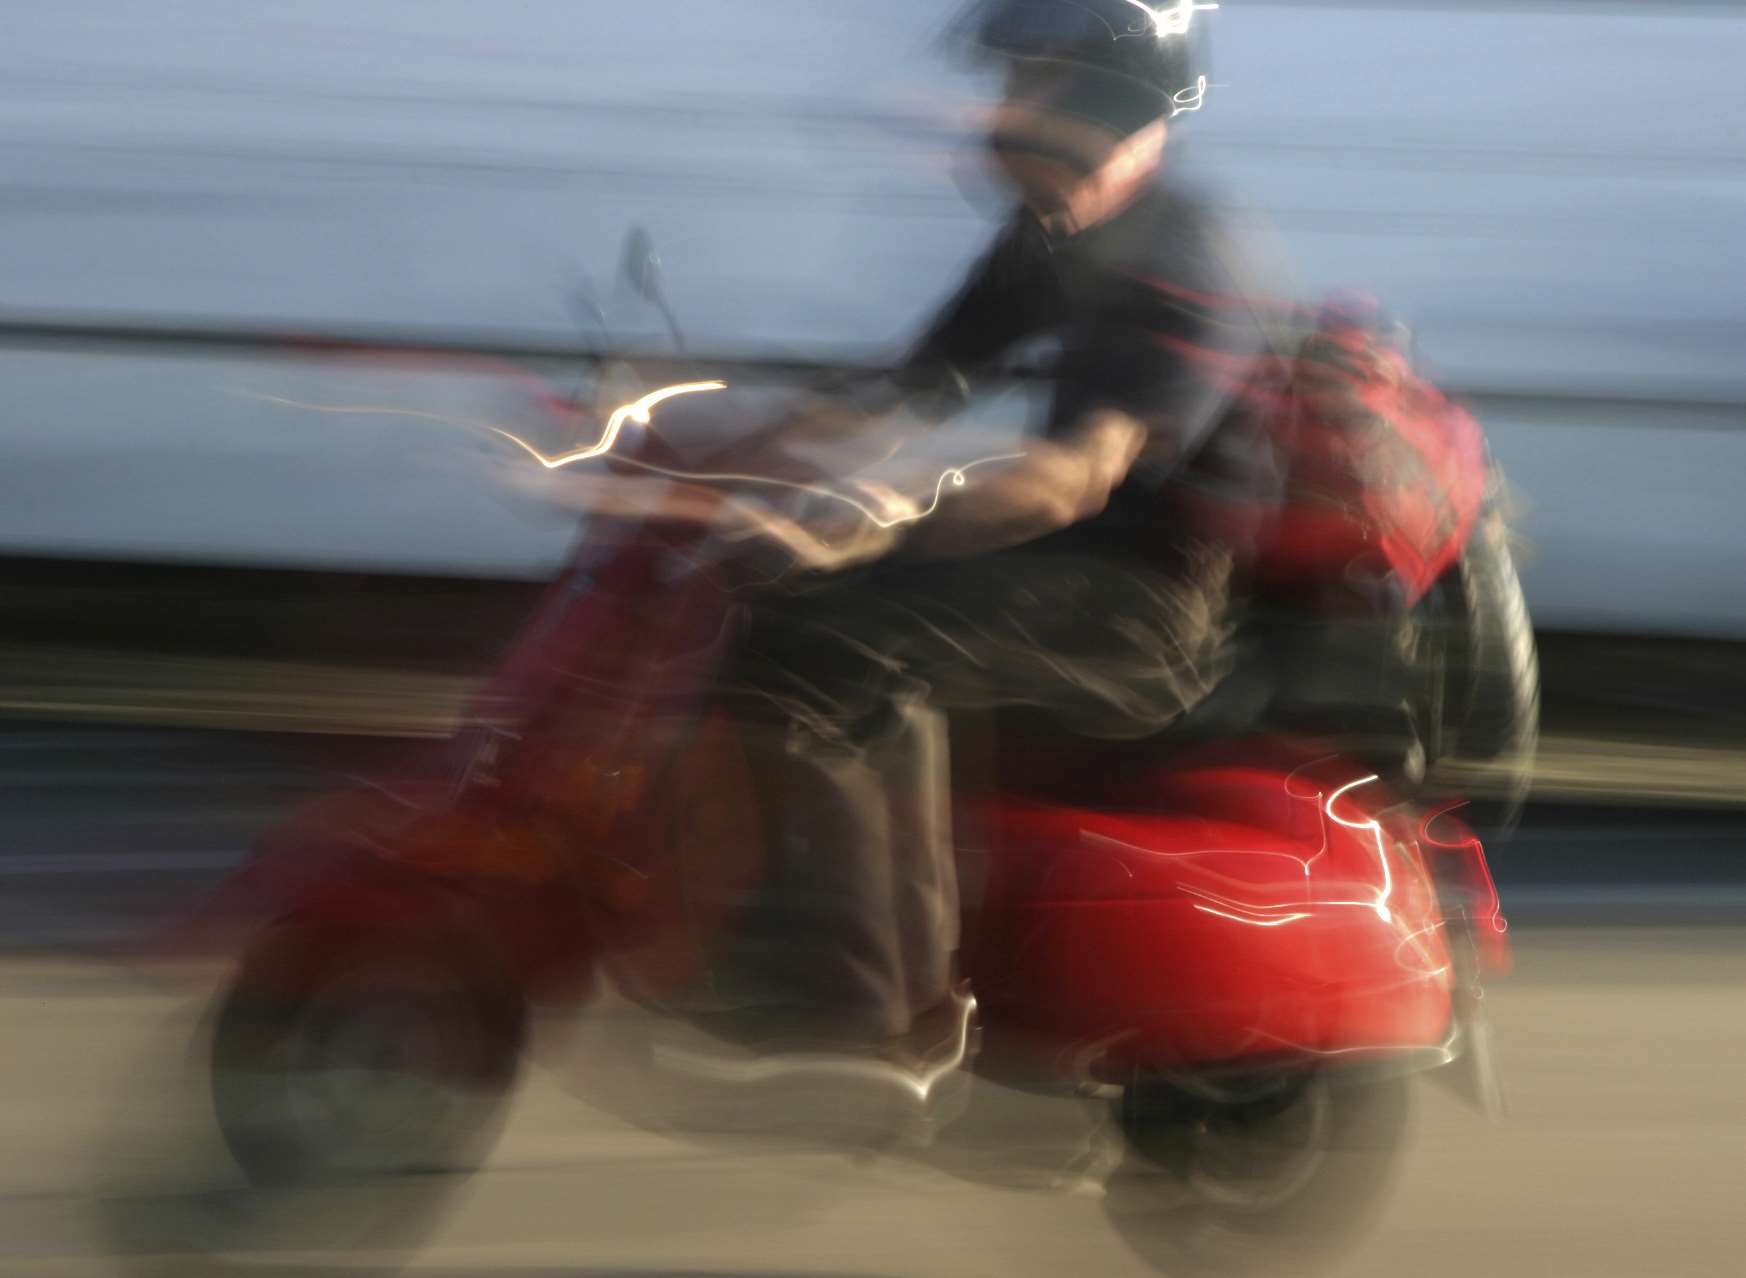 Thieves on a moped threw the substance. Stock image: iStock